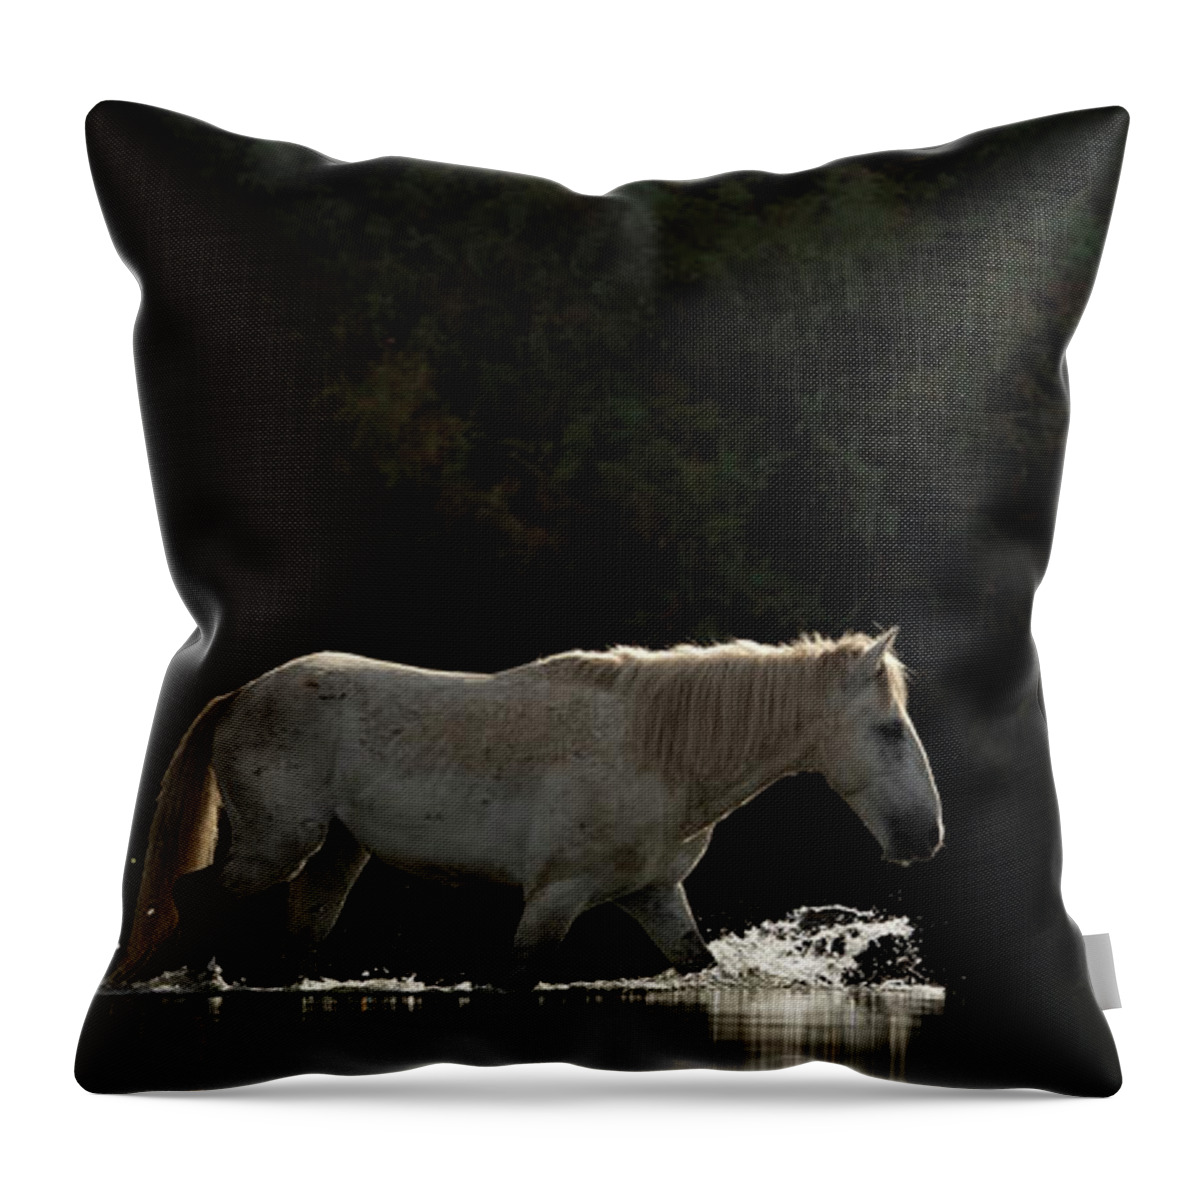 Stallion Throw Pillow featuring the photograph Lone Horse by Shannon Hastings